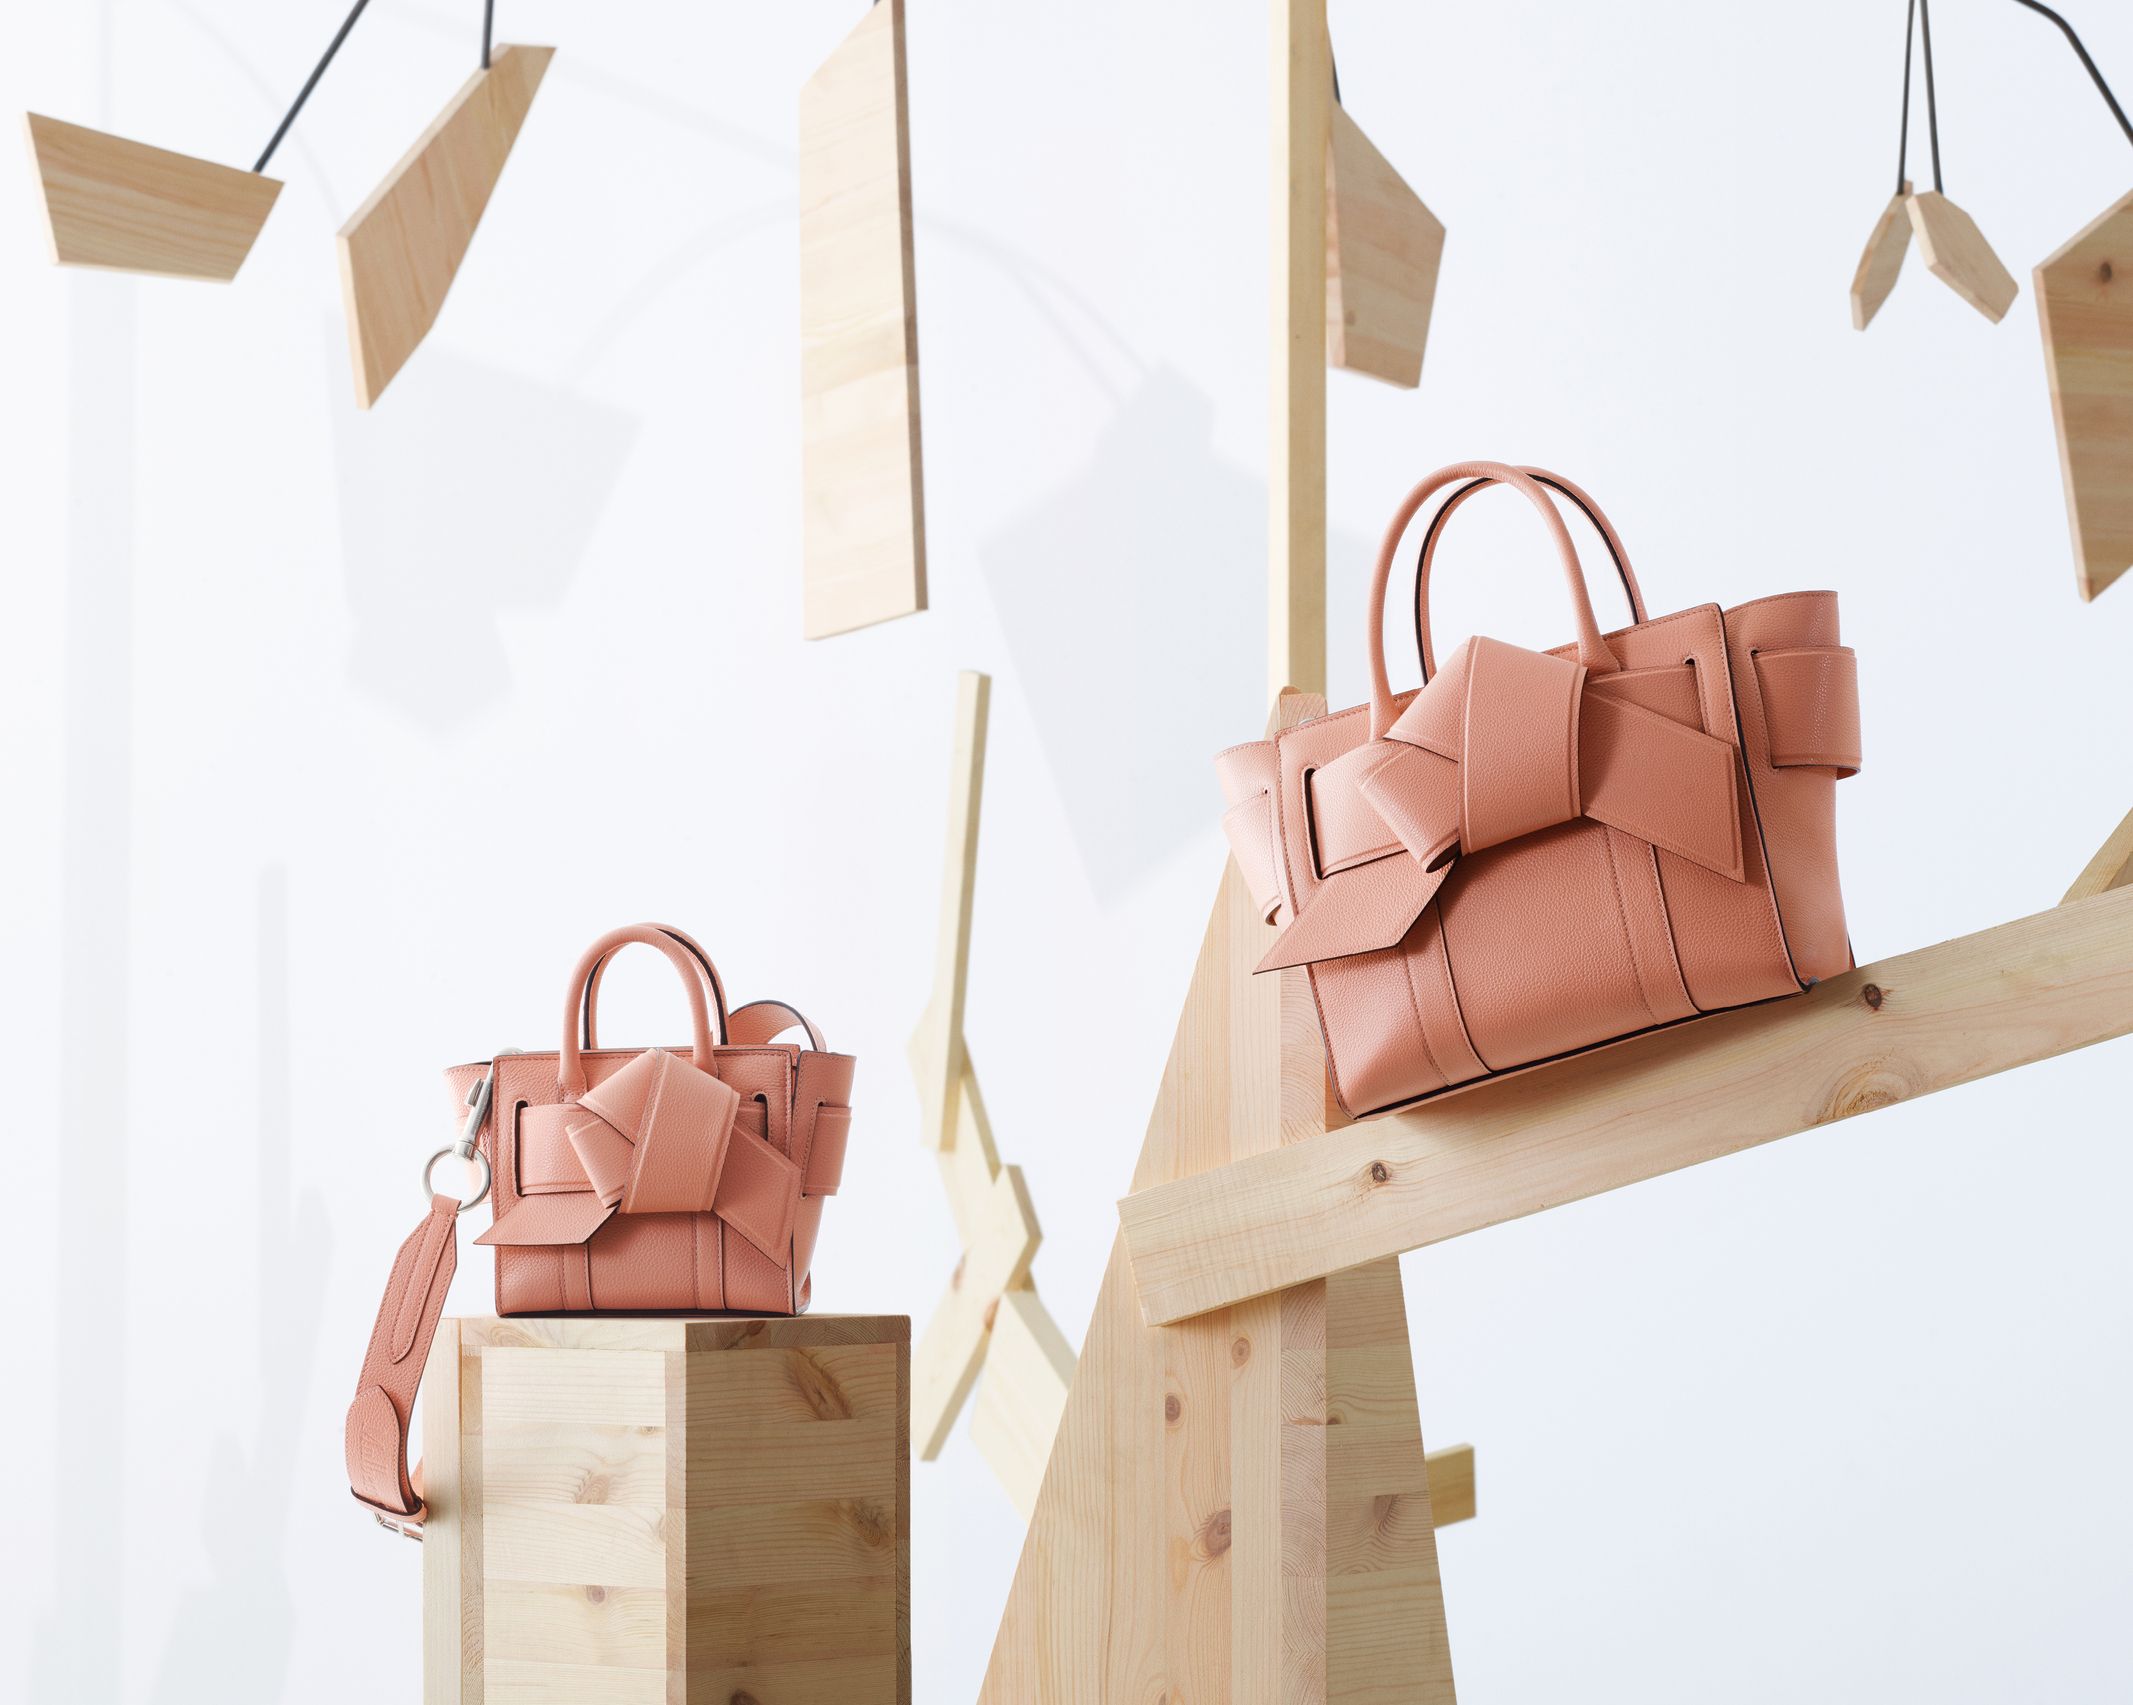 Acne Studios and Mulberry Launch Special Handbag Collaboration